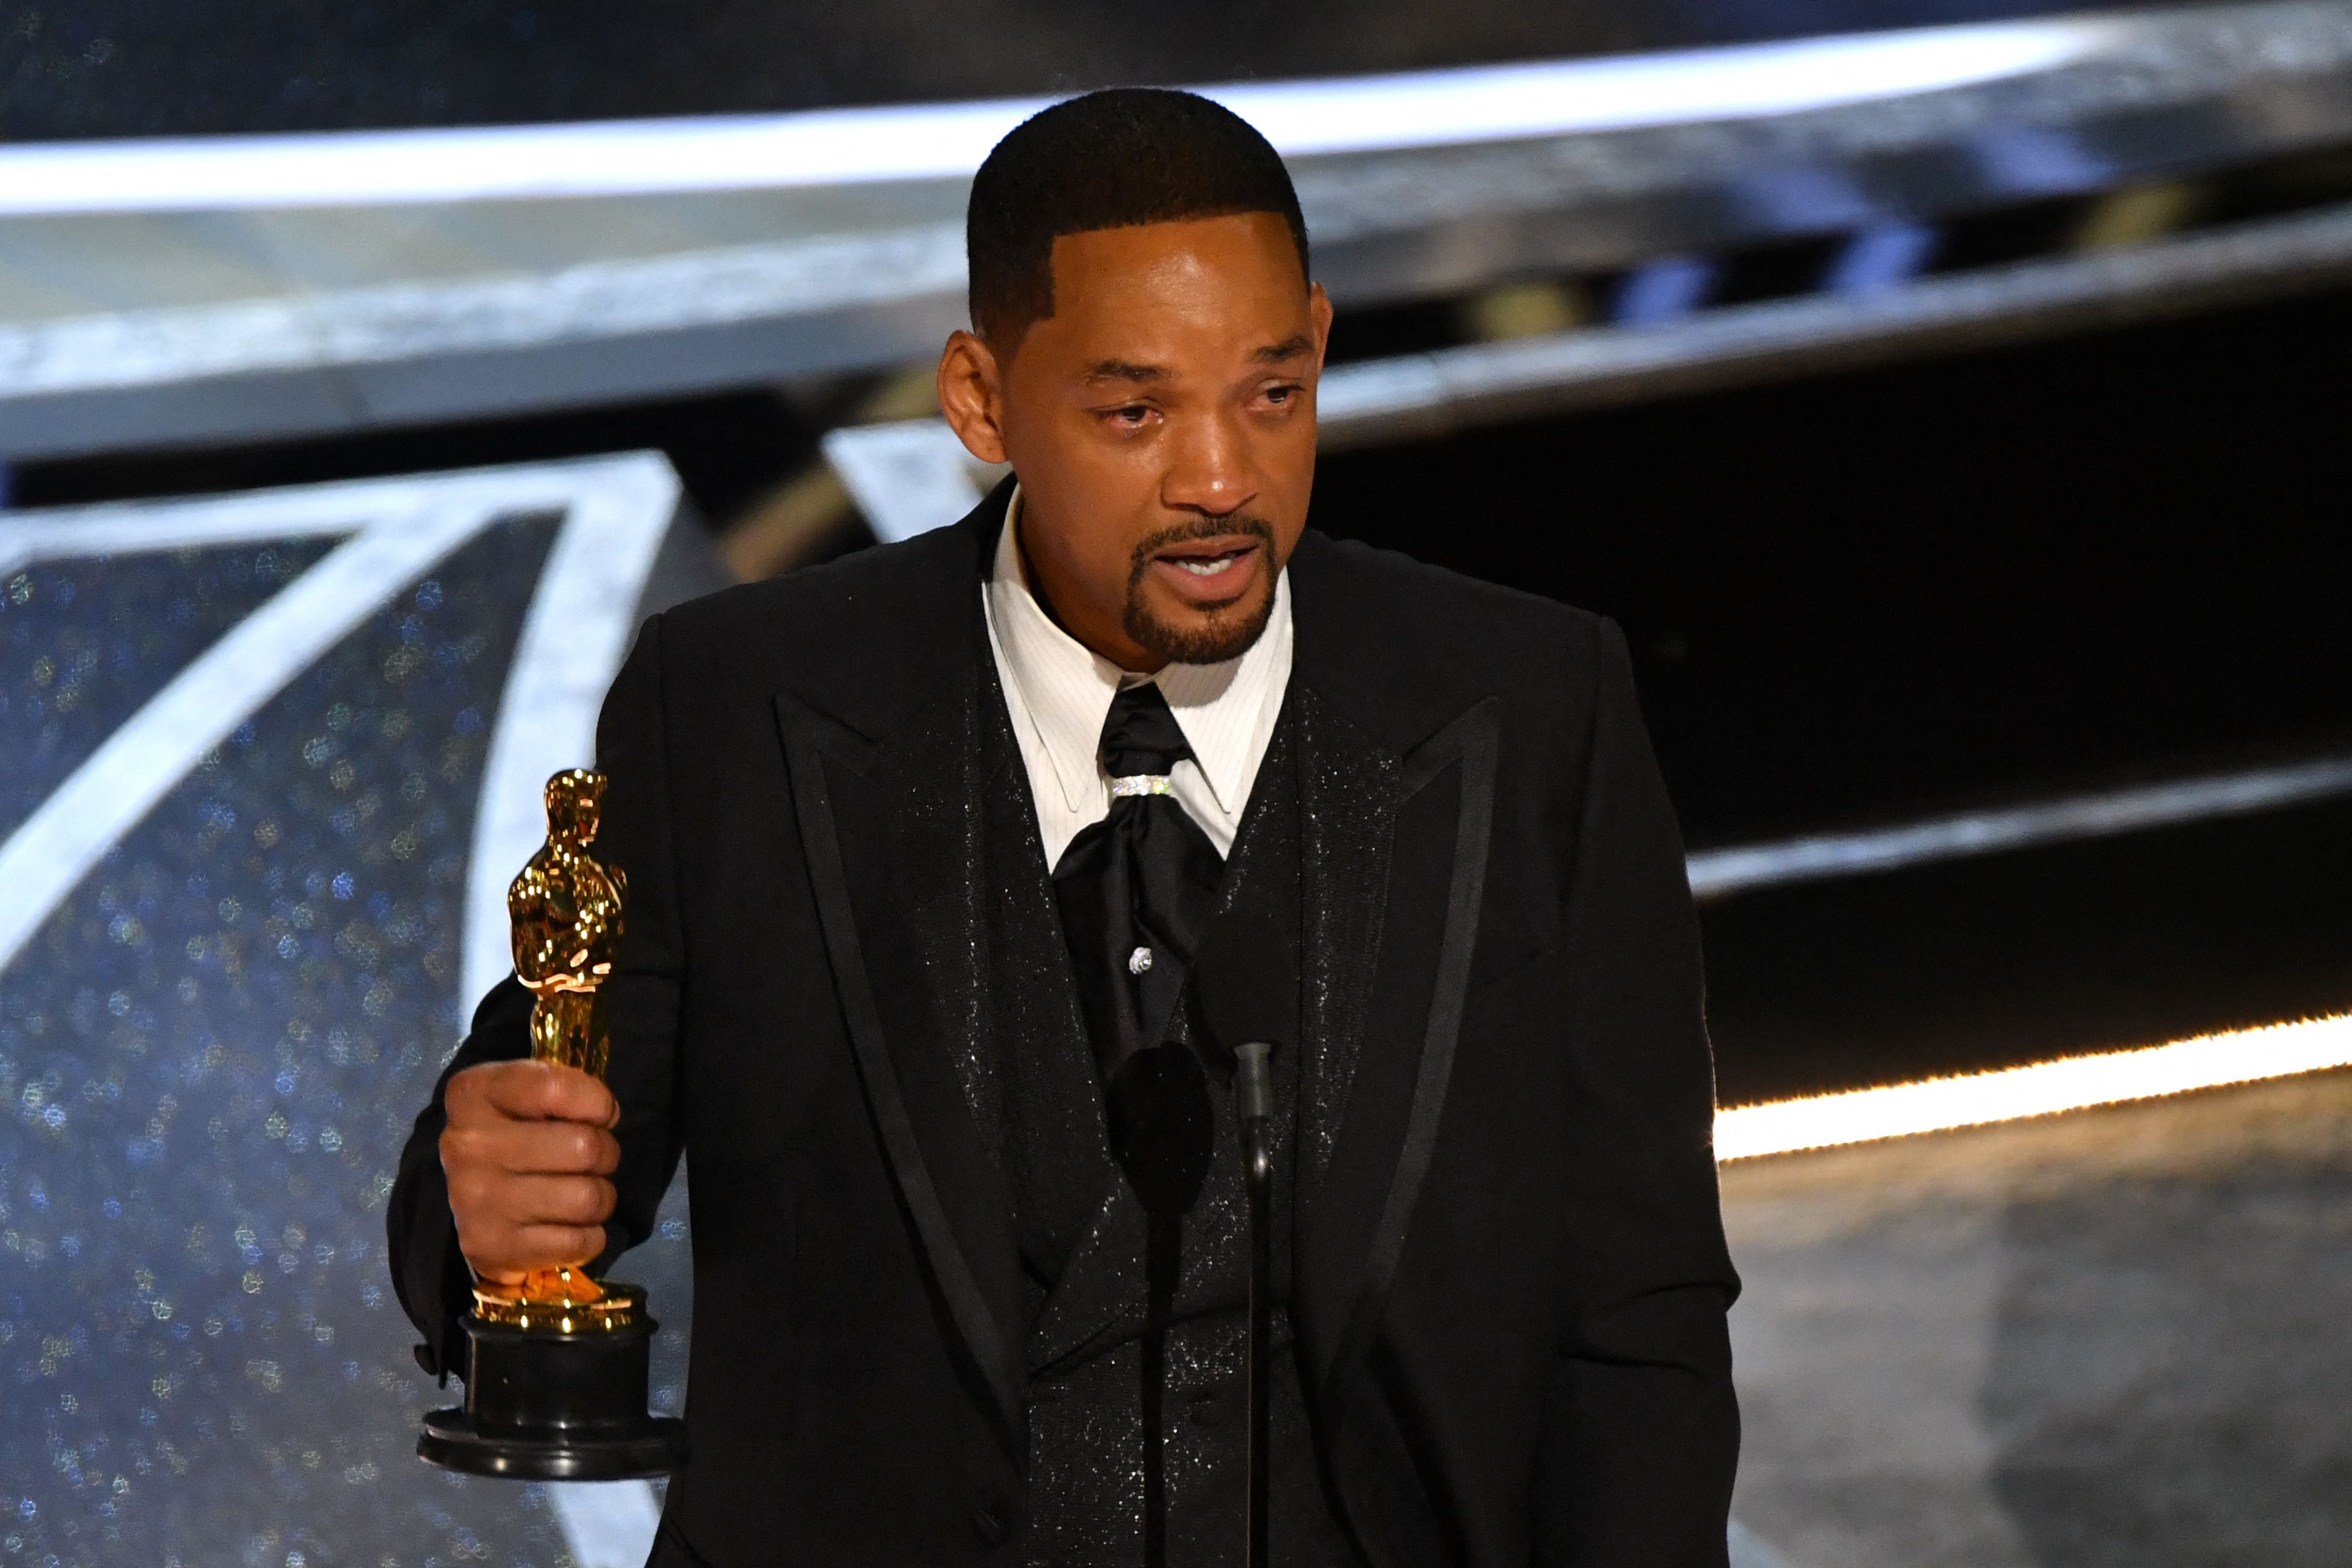 Will Smith dances with family after Oscar win, shocking slap